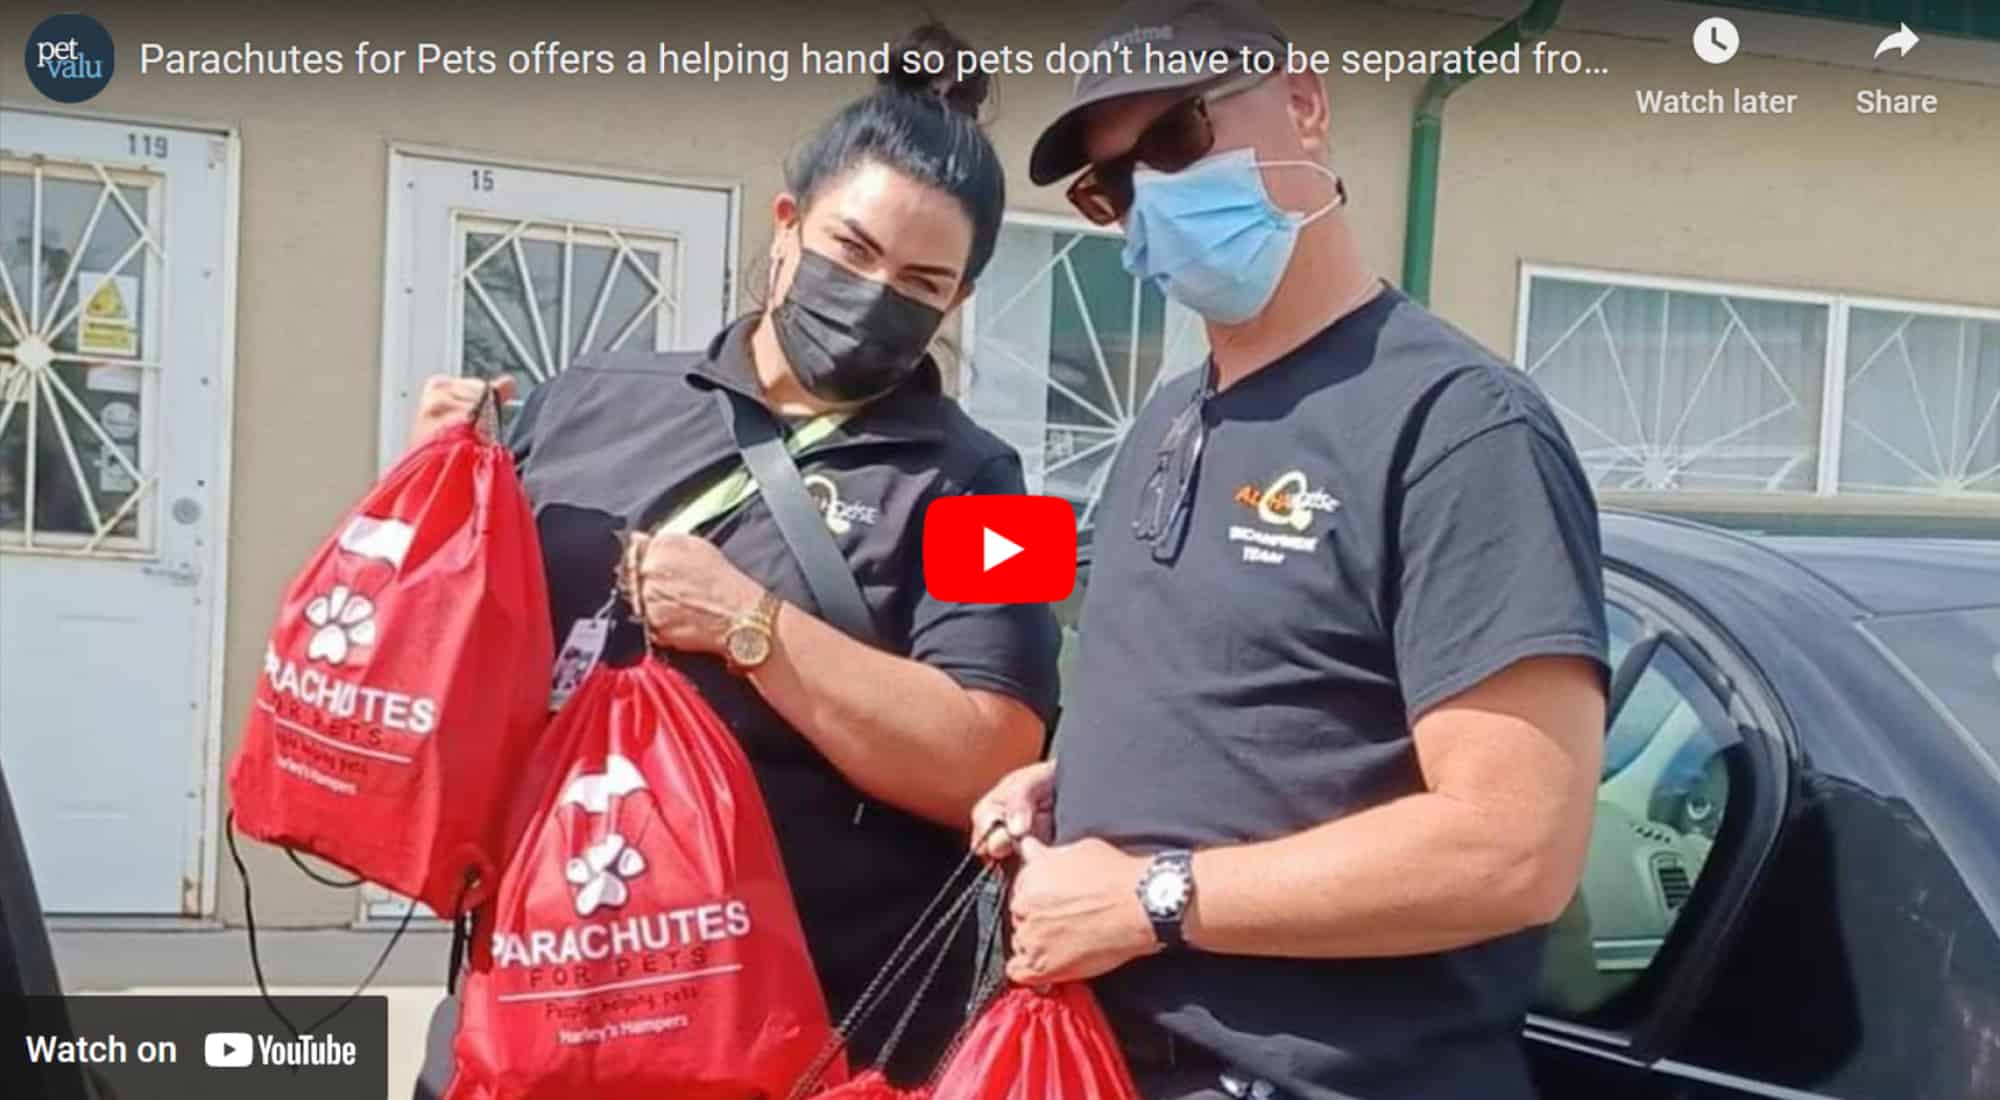 Parachutes for Pets offers a helping hand so pets don’t have to be separated from owners